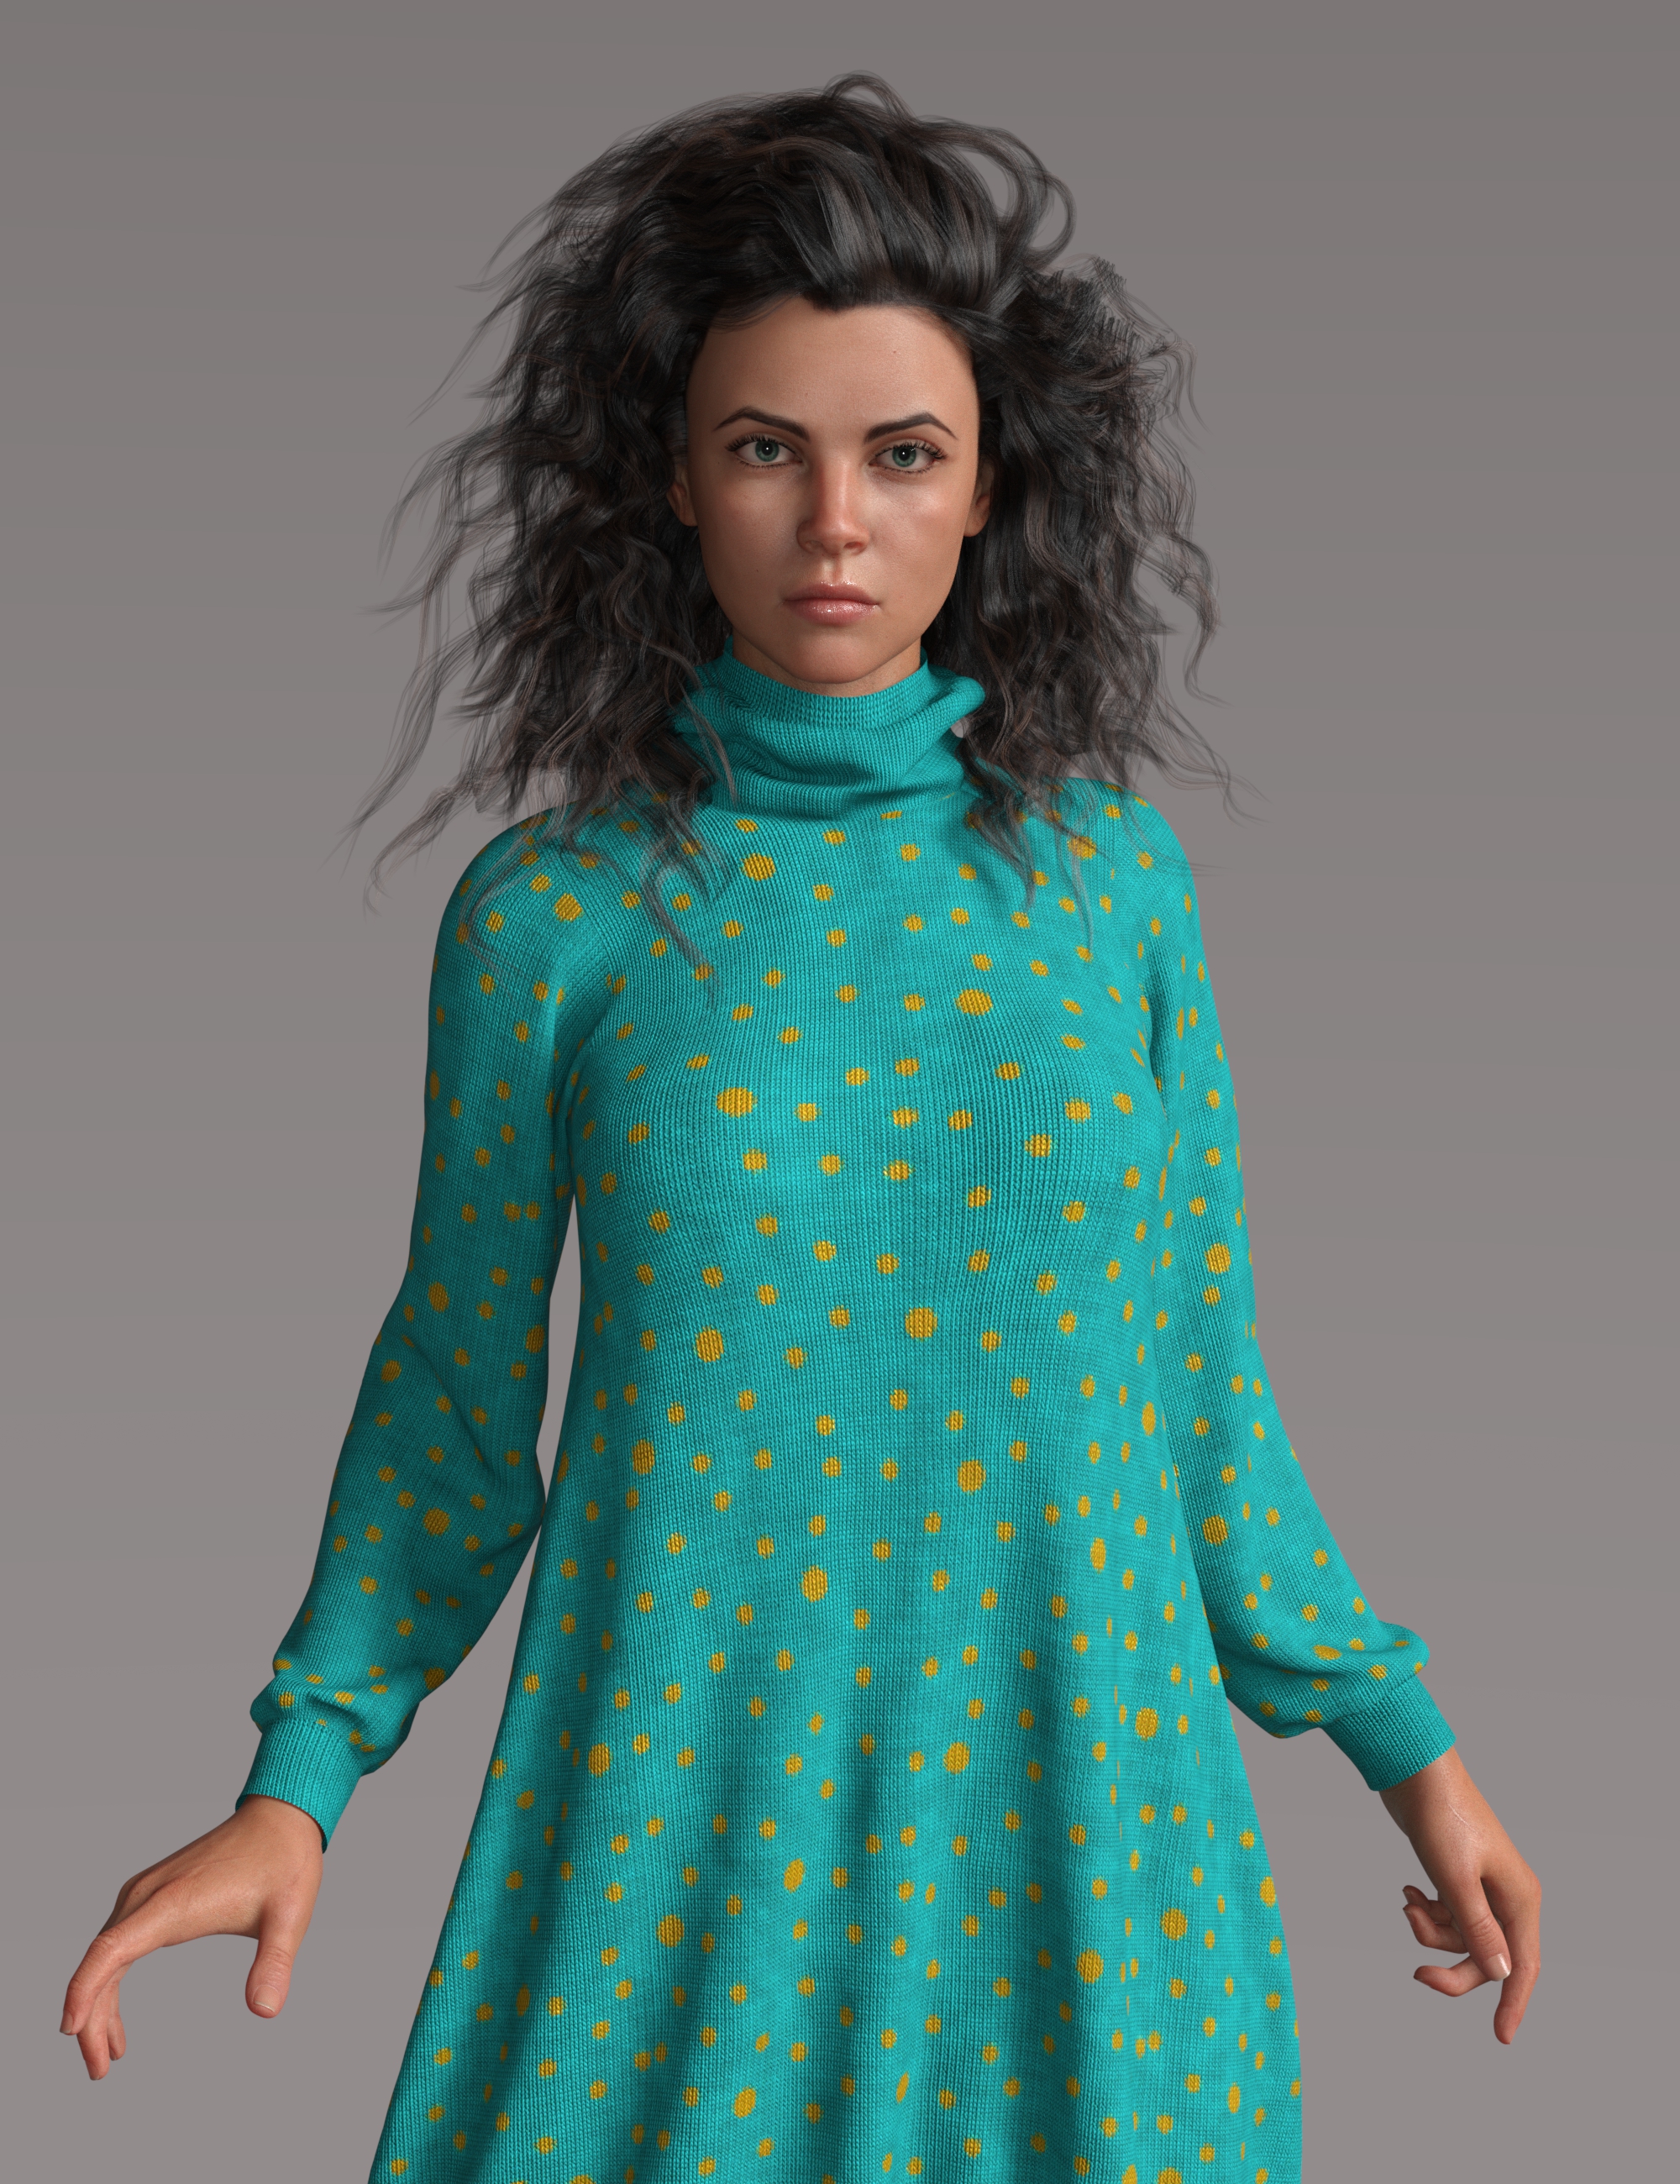 Knitted Geometry Shaders by: Sade, 3D Models by Daz 3D